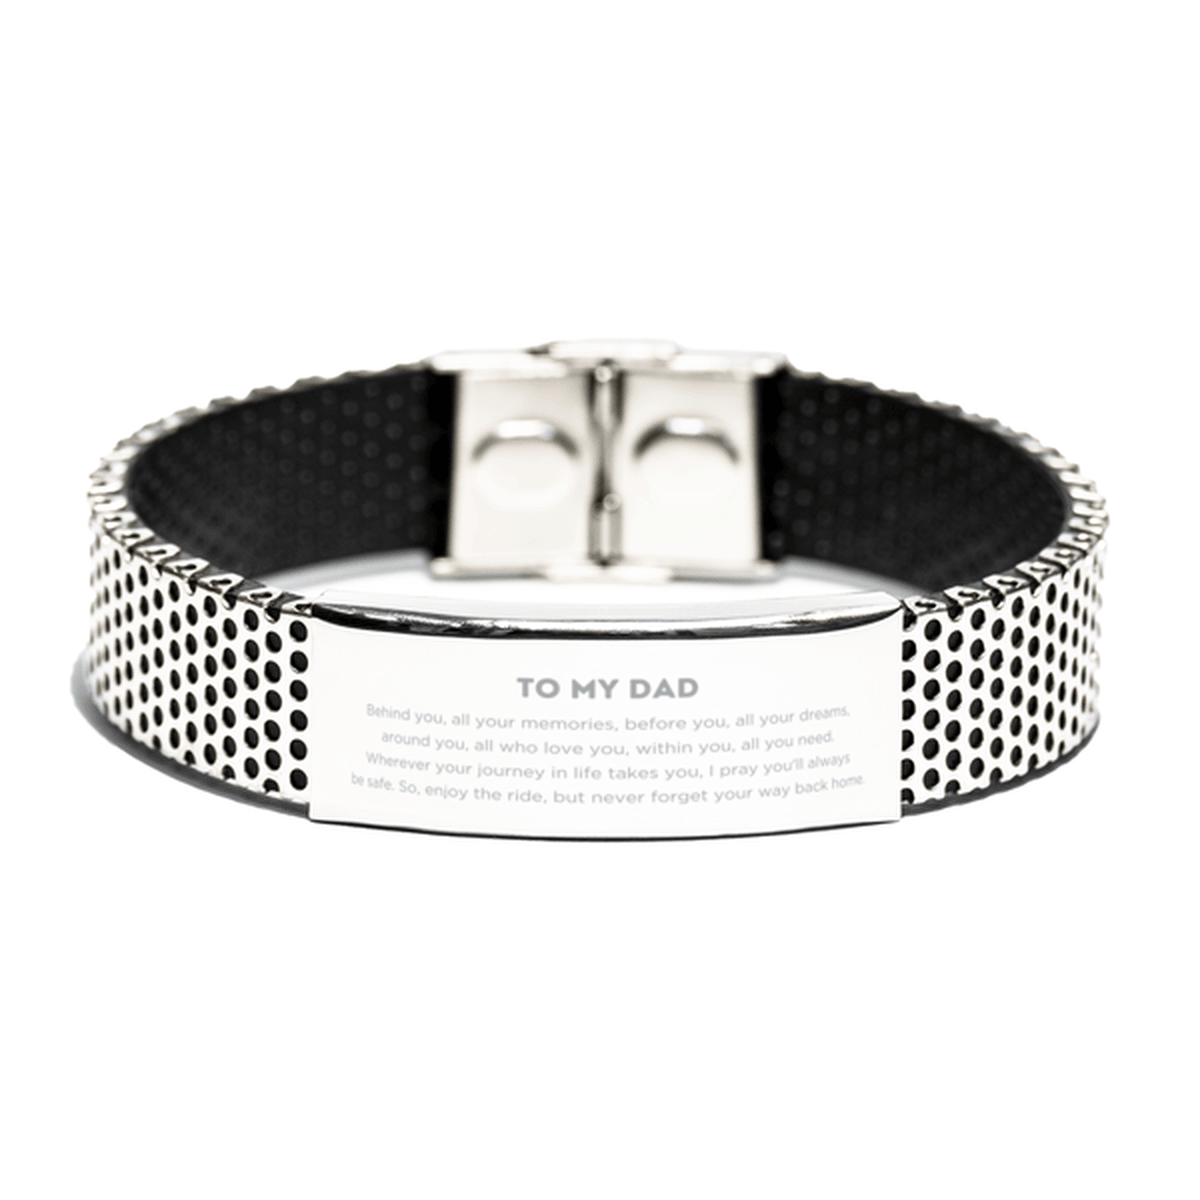 To My Dad Gifts, Inspirational Dad Stainless Steel Bracelet, Sentimental Birthday Christmas Unique Gifts For Dad Behind you, all your memories, before you, all your dreams, around you, all who love you, within you, all you need - Mallard Moon Gift Shop